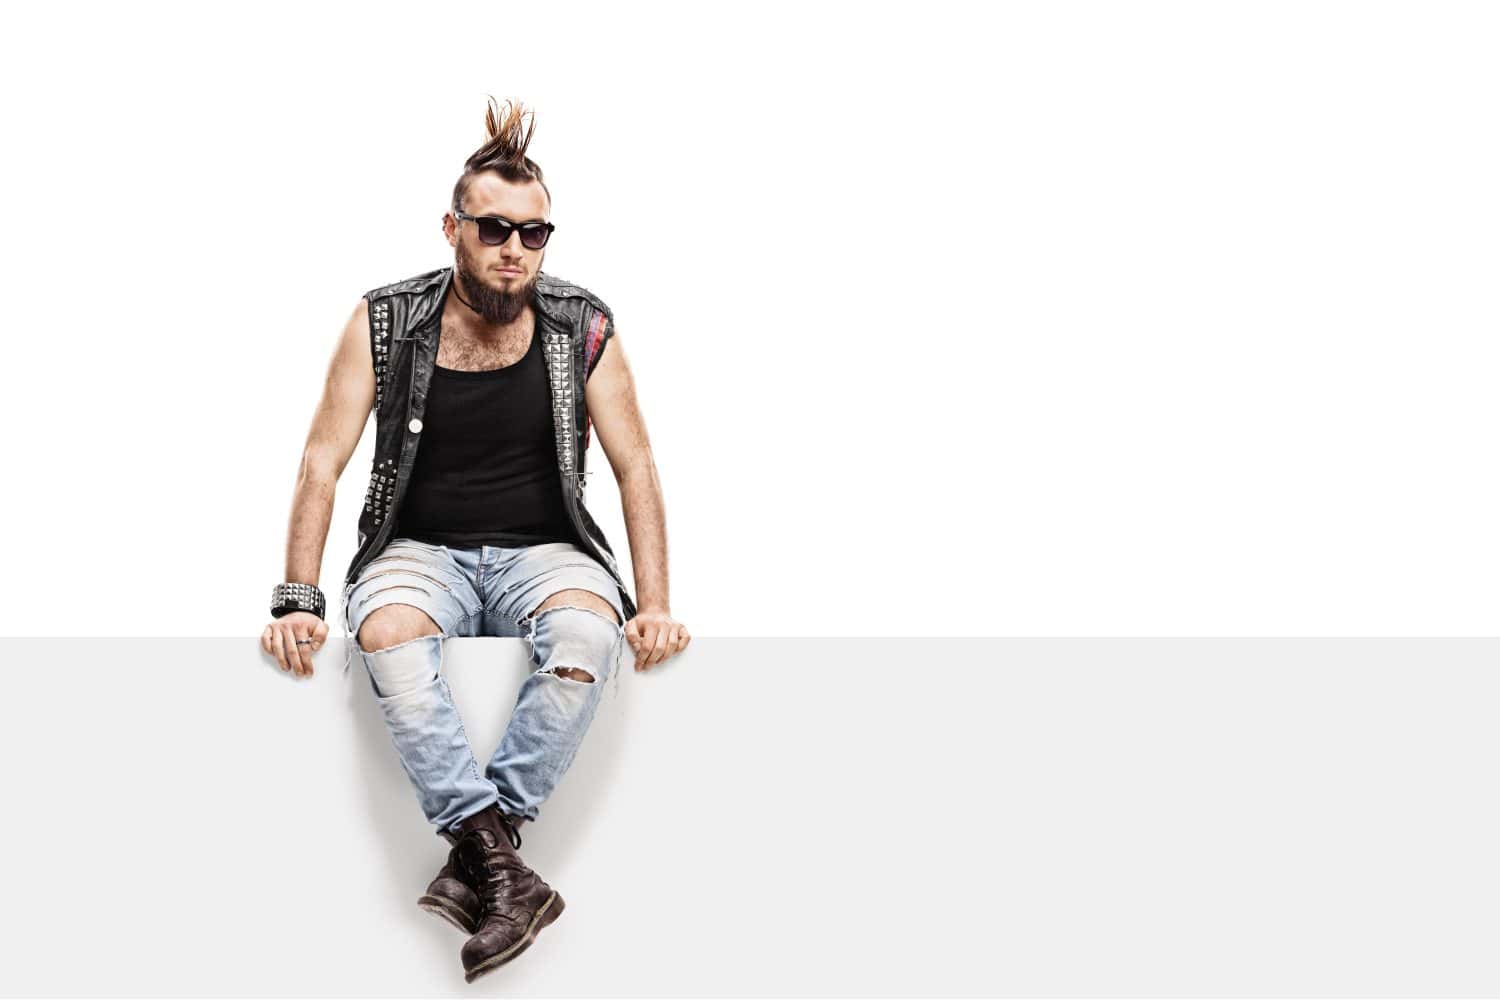 Young punk rocker with a Mohawk hairstyle and a leather vest sitting on a panel isolated on white background